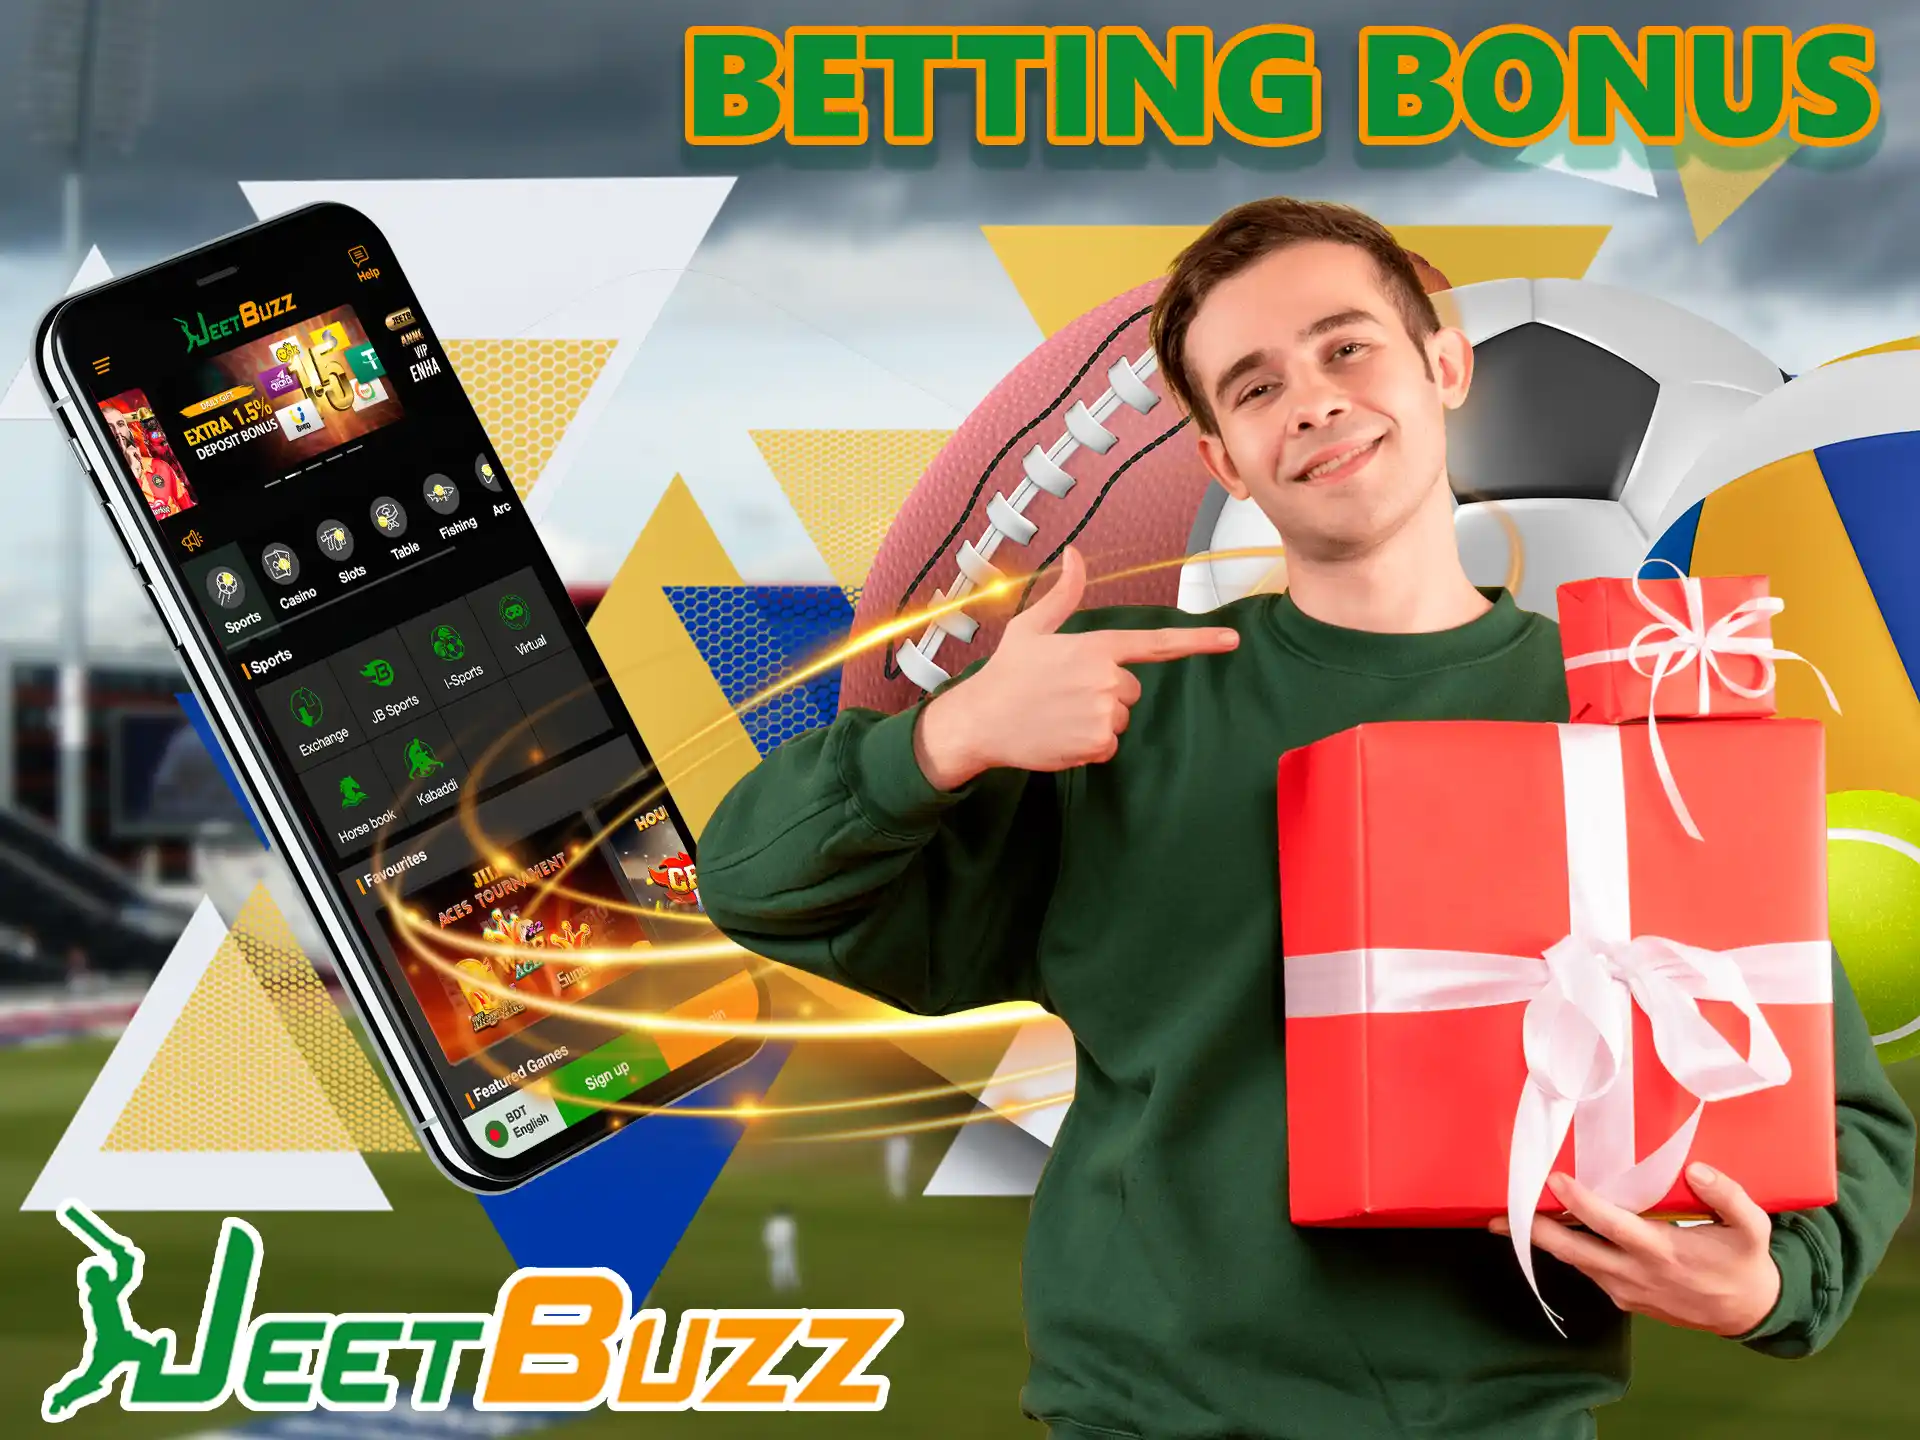 Get a nice boost to your balance when you place bets on the JeetBuzz app.